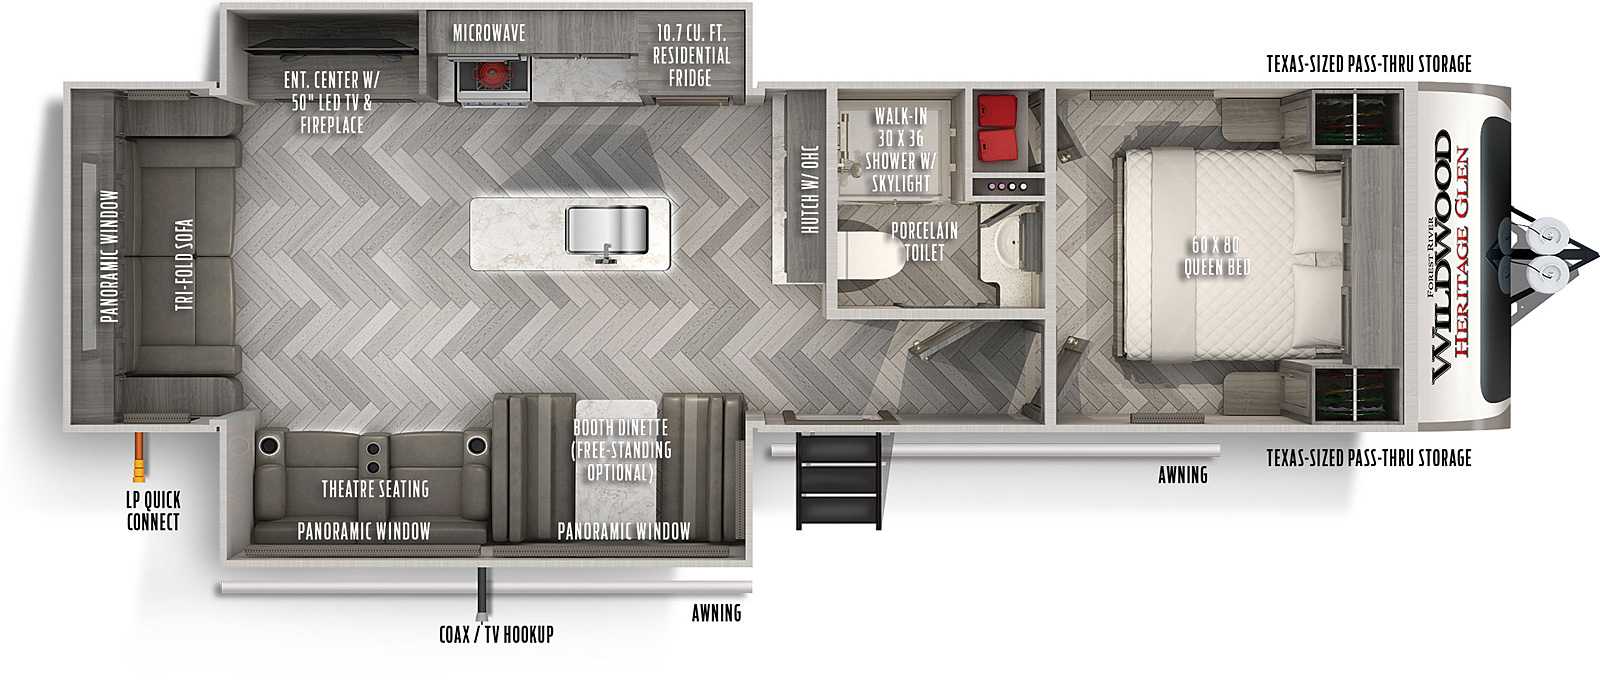 Heritage Glen 271RL floorplan. The 271RL has 2 slide outs and one entry door.